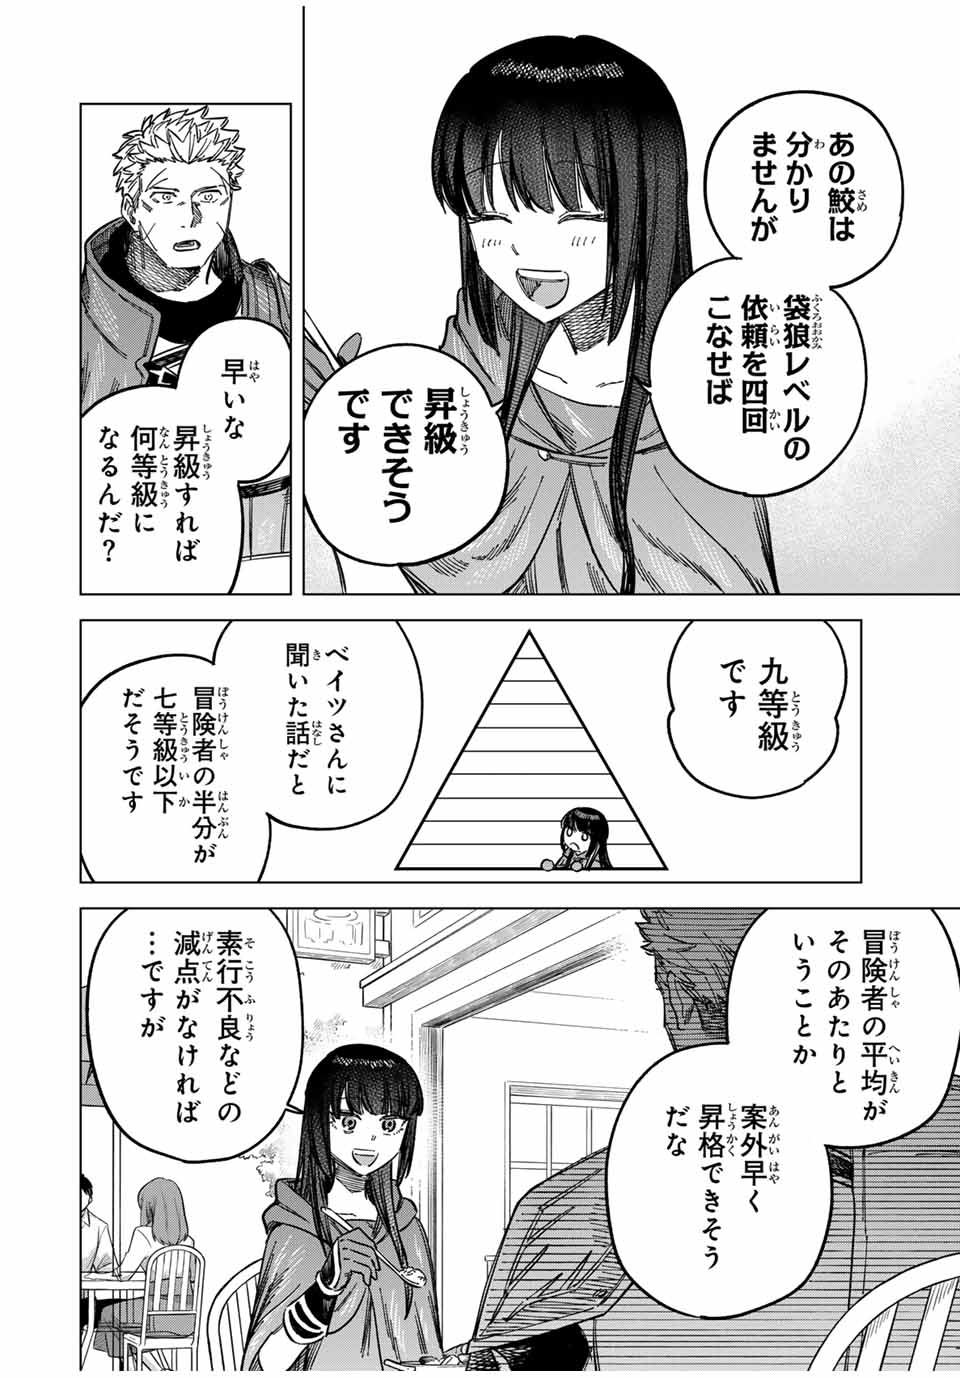 Witch and Mercenary 魔女と傭兵 第6話 - Page 12